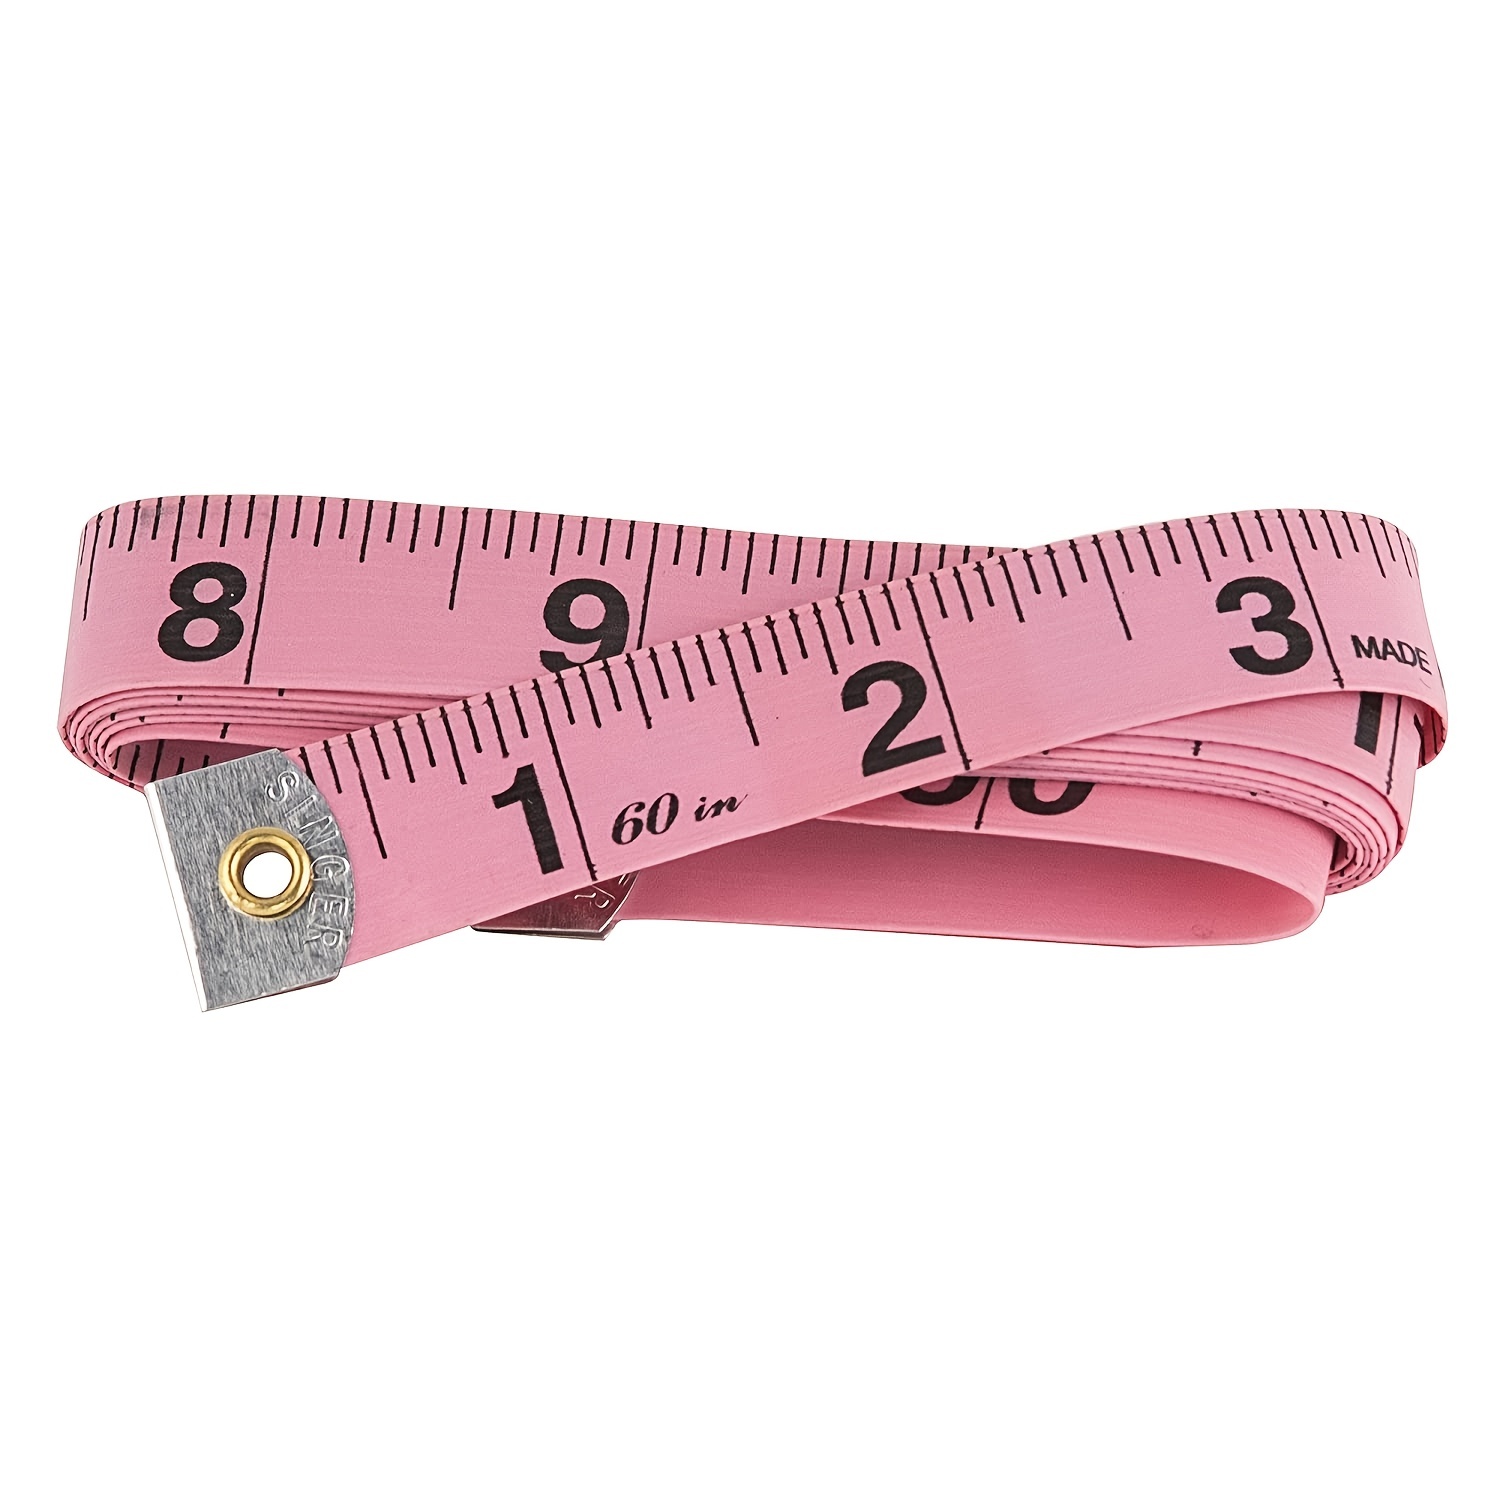 Body Measuring Tape, Measuring Tape Double Scale High Accuracy